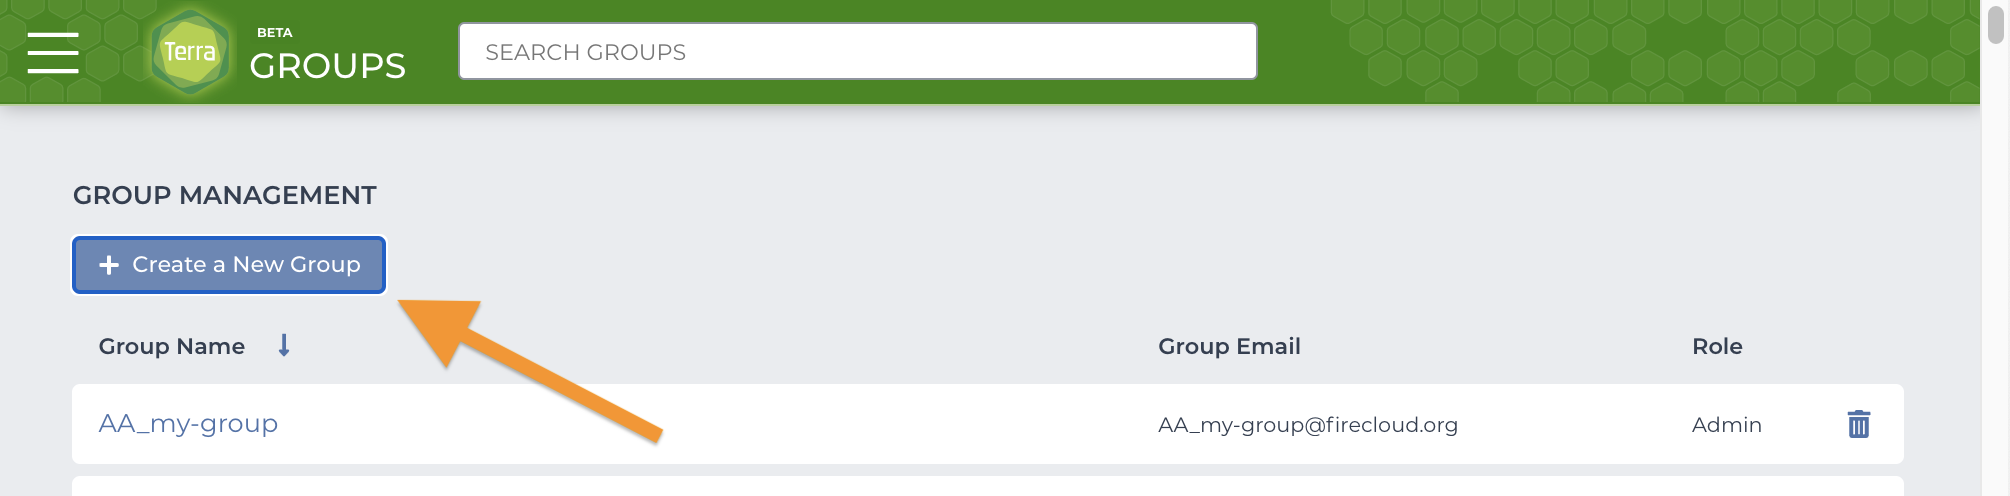 Screenshot of Groups page in Terra pointing out the 'Create a new group' button at the top